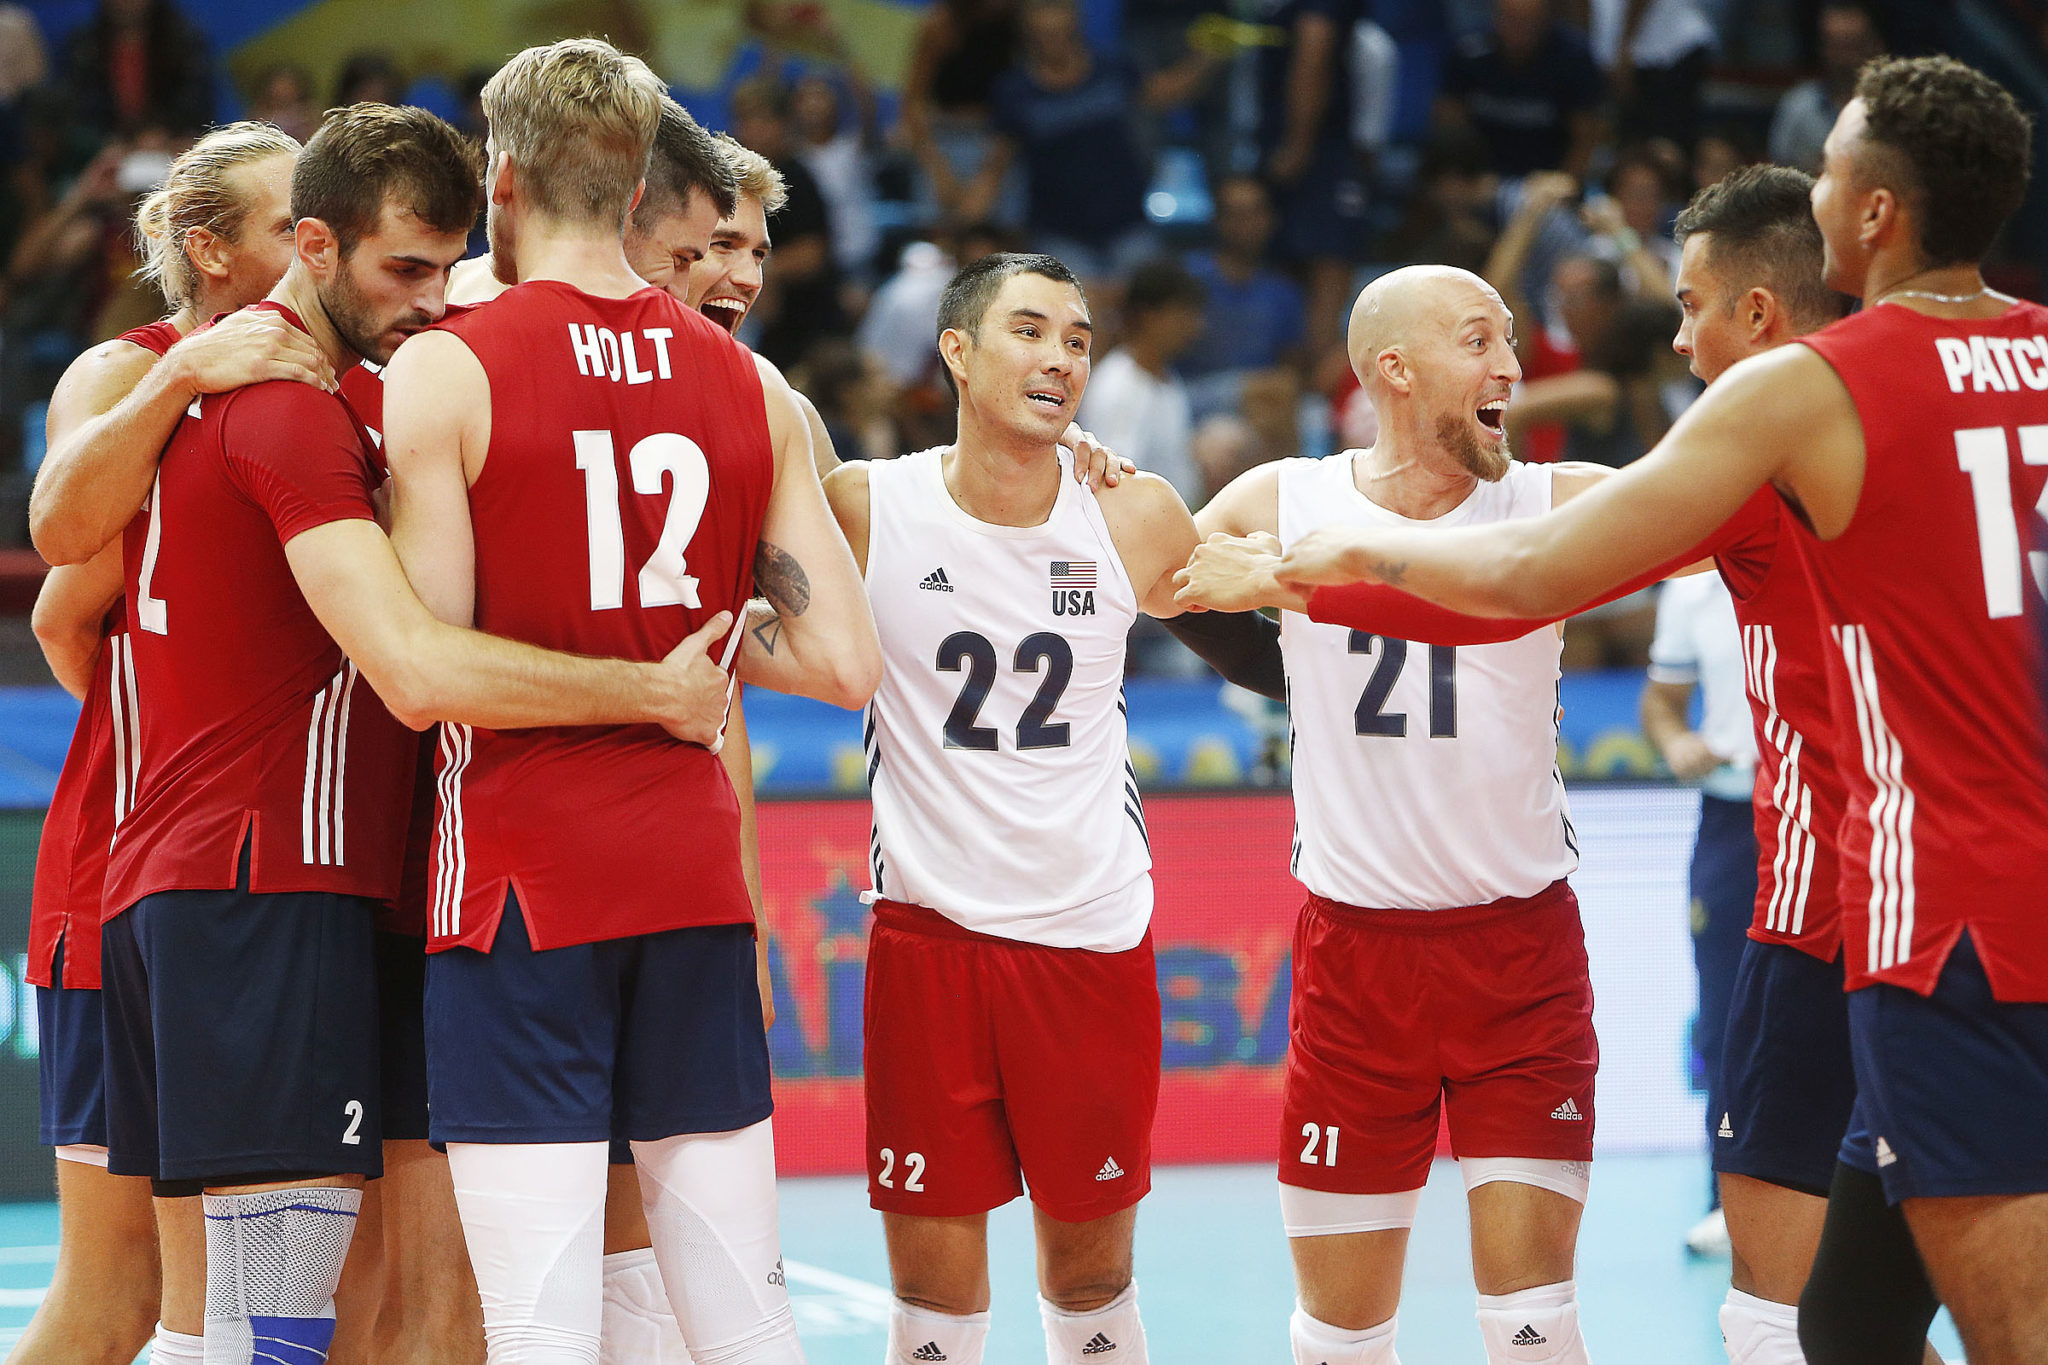 Men's Volleyball World Championships September 12th Daily Summary